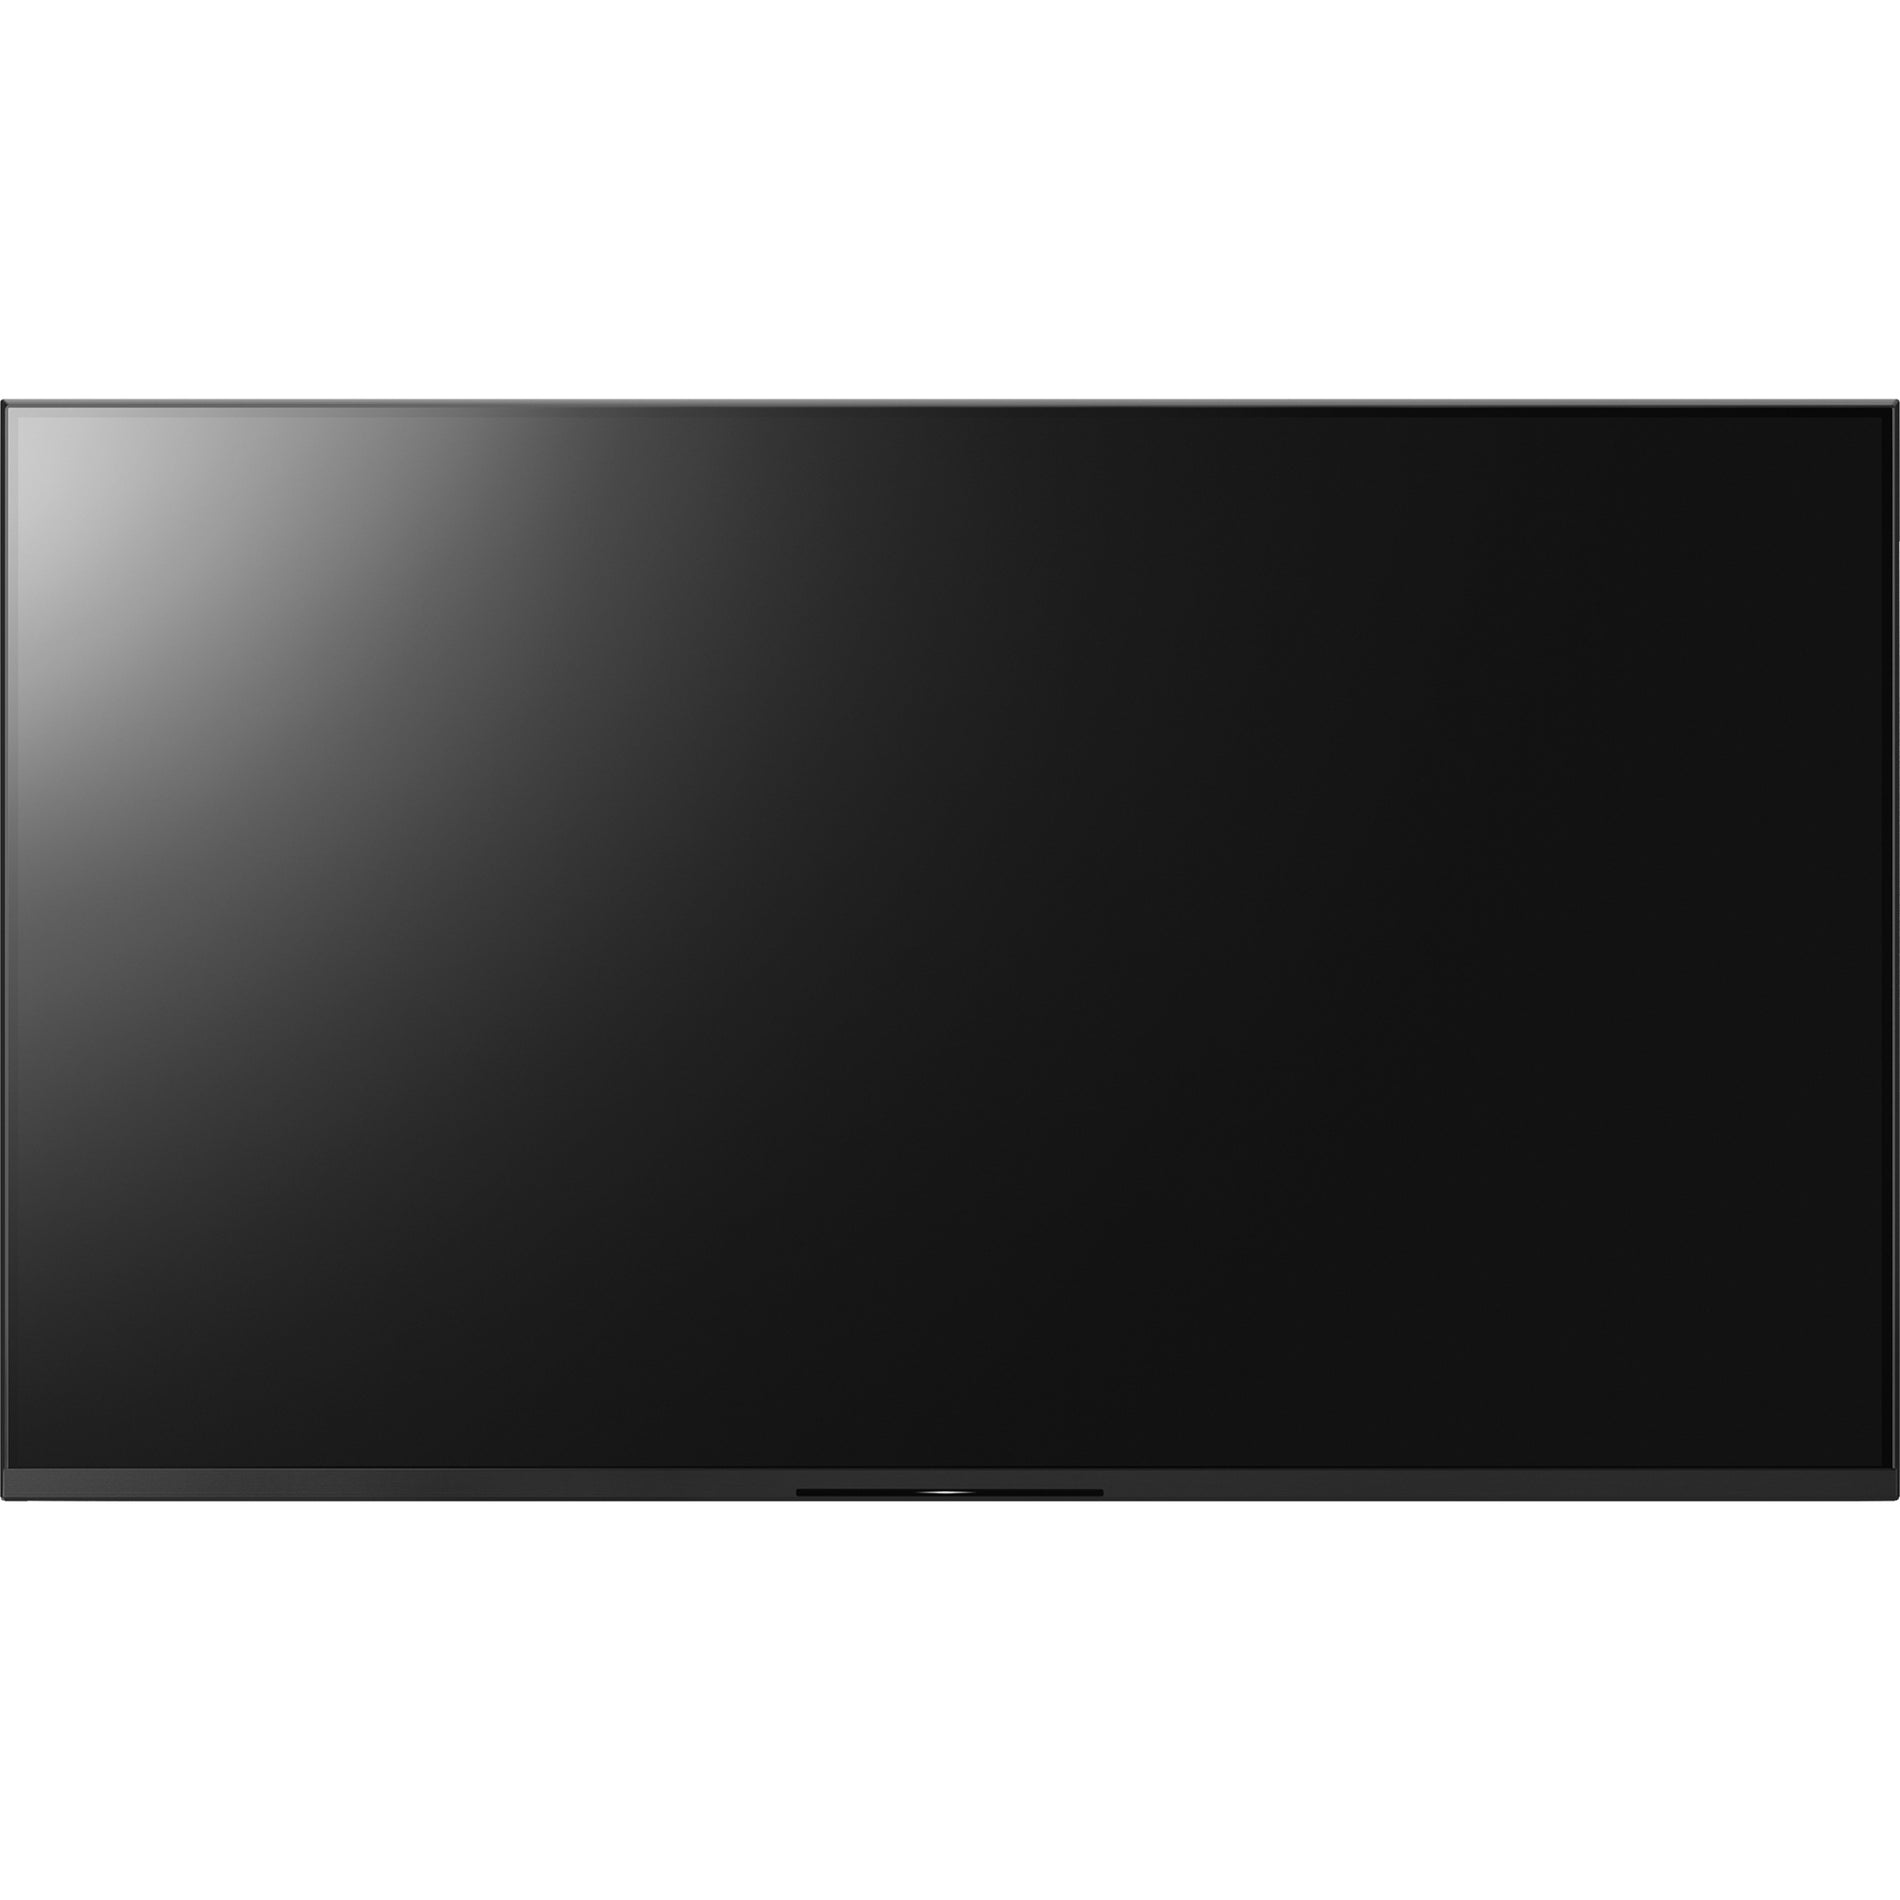 Sony Pro FW43BZ35J 43" BRAVIA 4K HDR Professional Display, Android, 3 Year Warranty, Energy Star